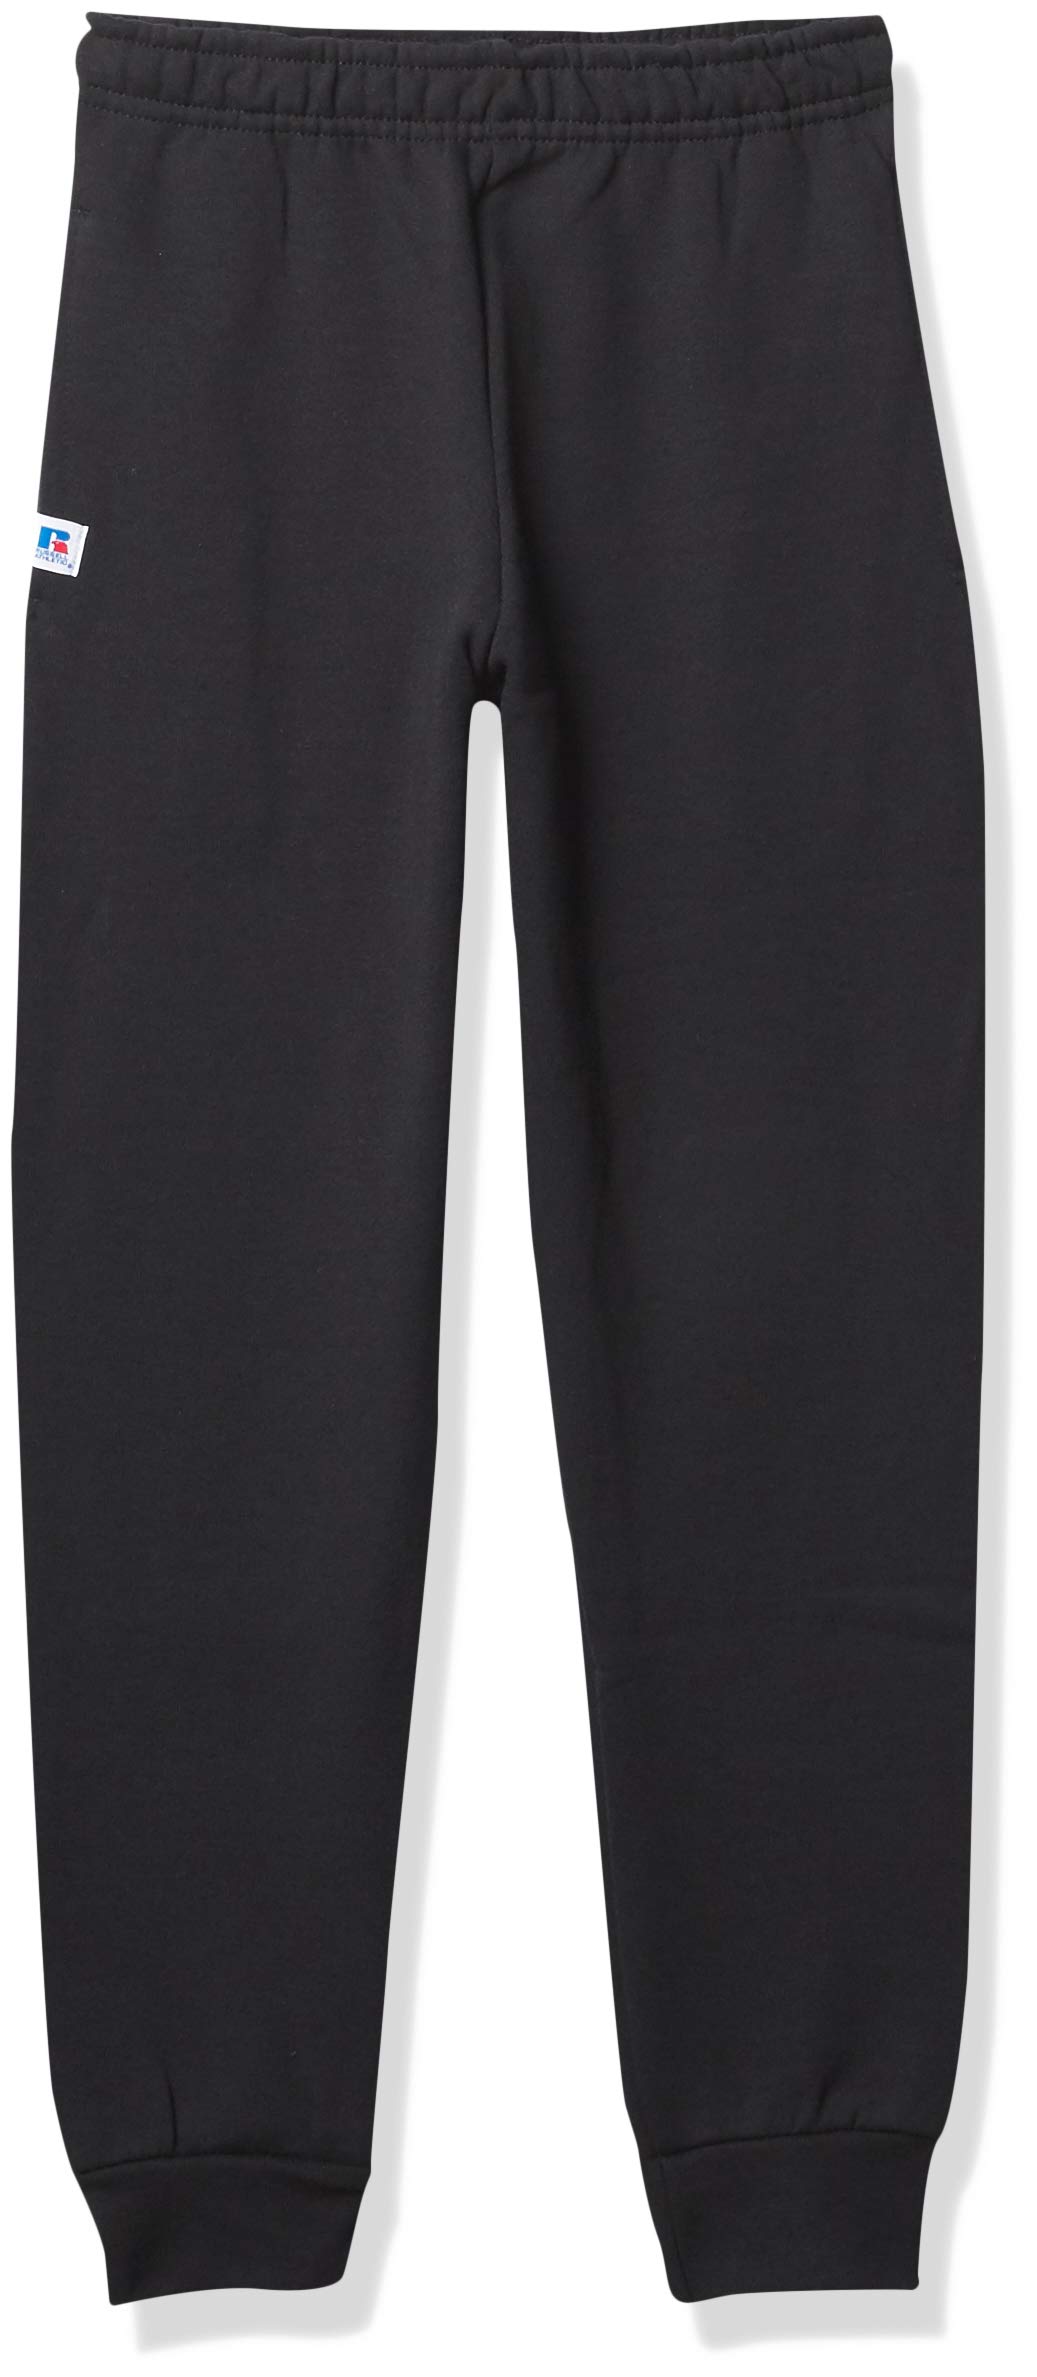 Russell Athletic Boys' Dri-Power Fleece Sweatpants & Joggers with Pockets, Moisture Wicking